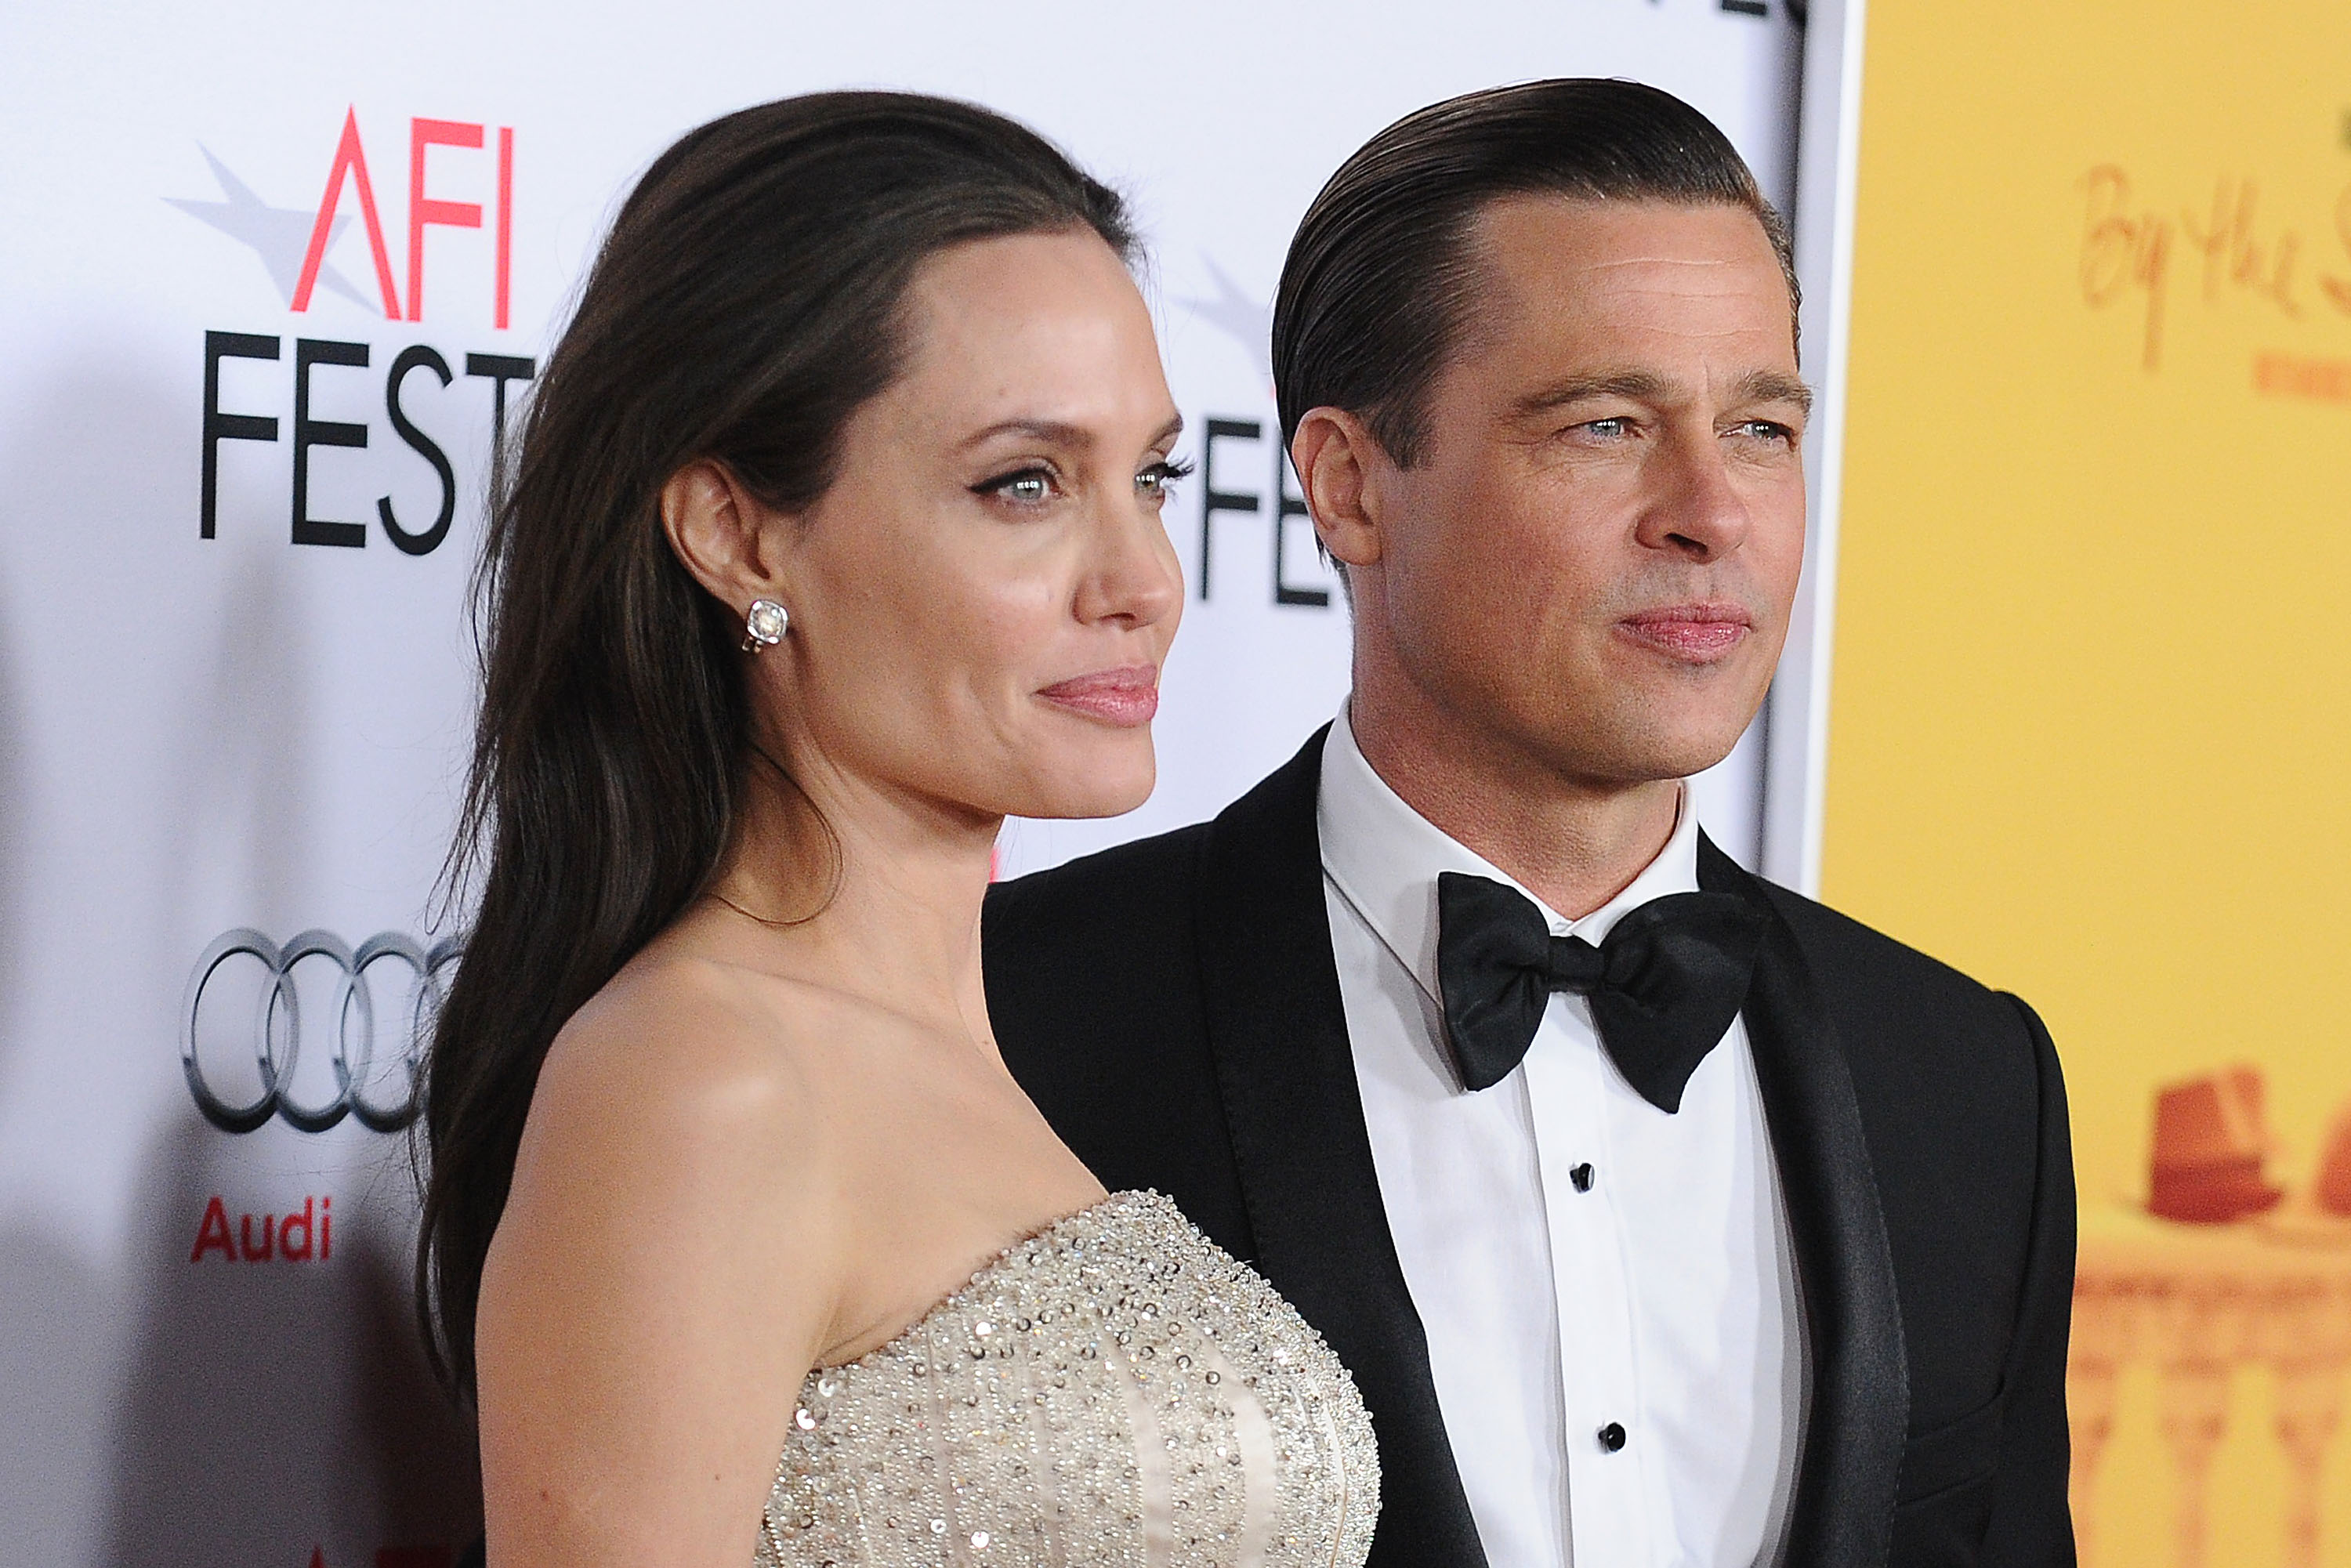 Angelina Jolie and Brad Pitt attend the premiere of "By the Sea" at the 2015 AFI Fest at TCL Chinese 6 Theatres on November 5, 2015 in Hollywood, California.